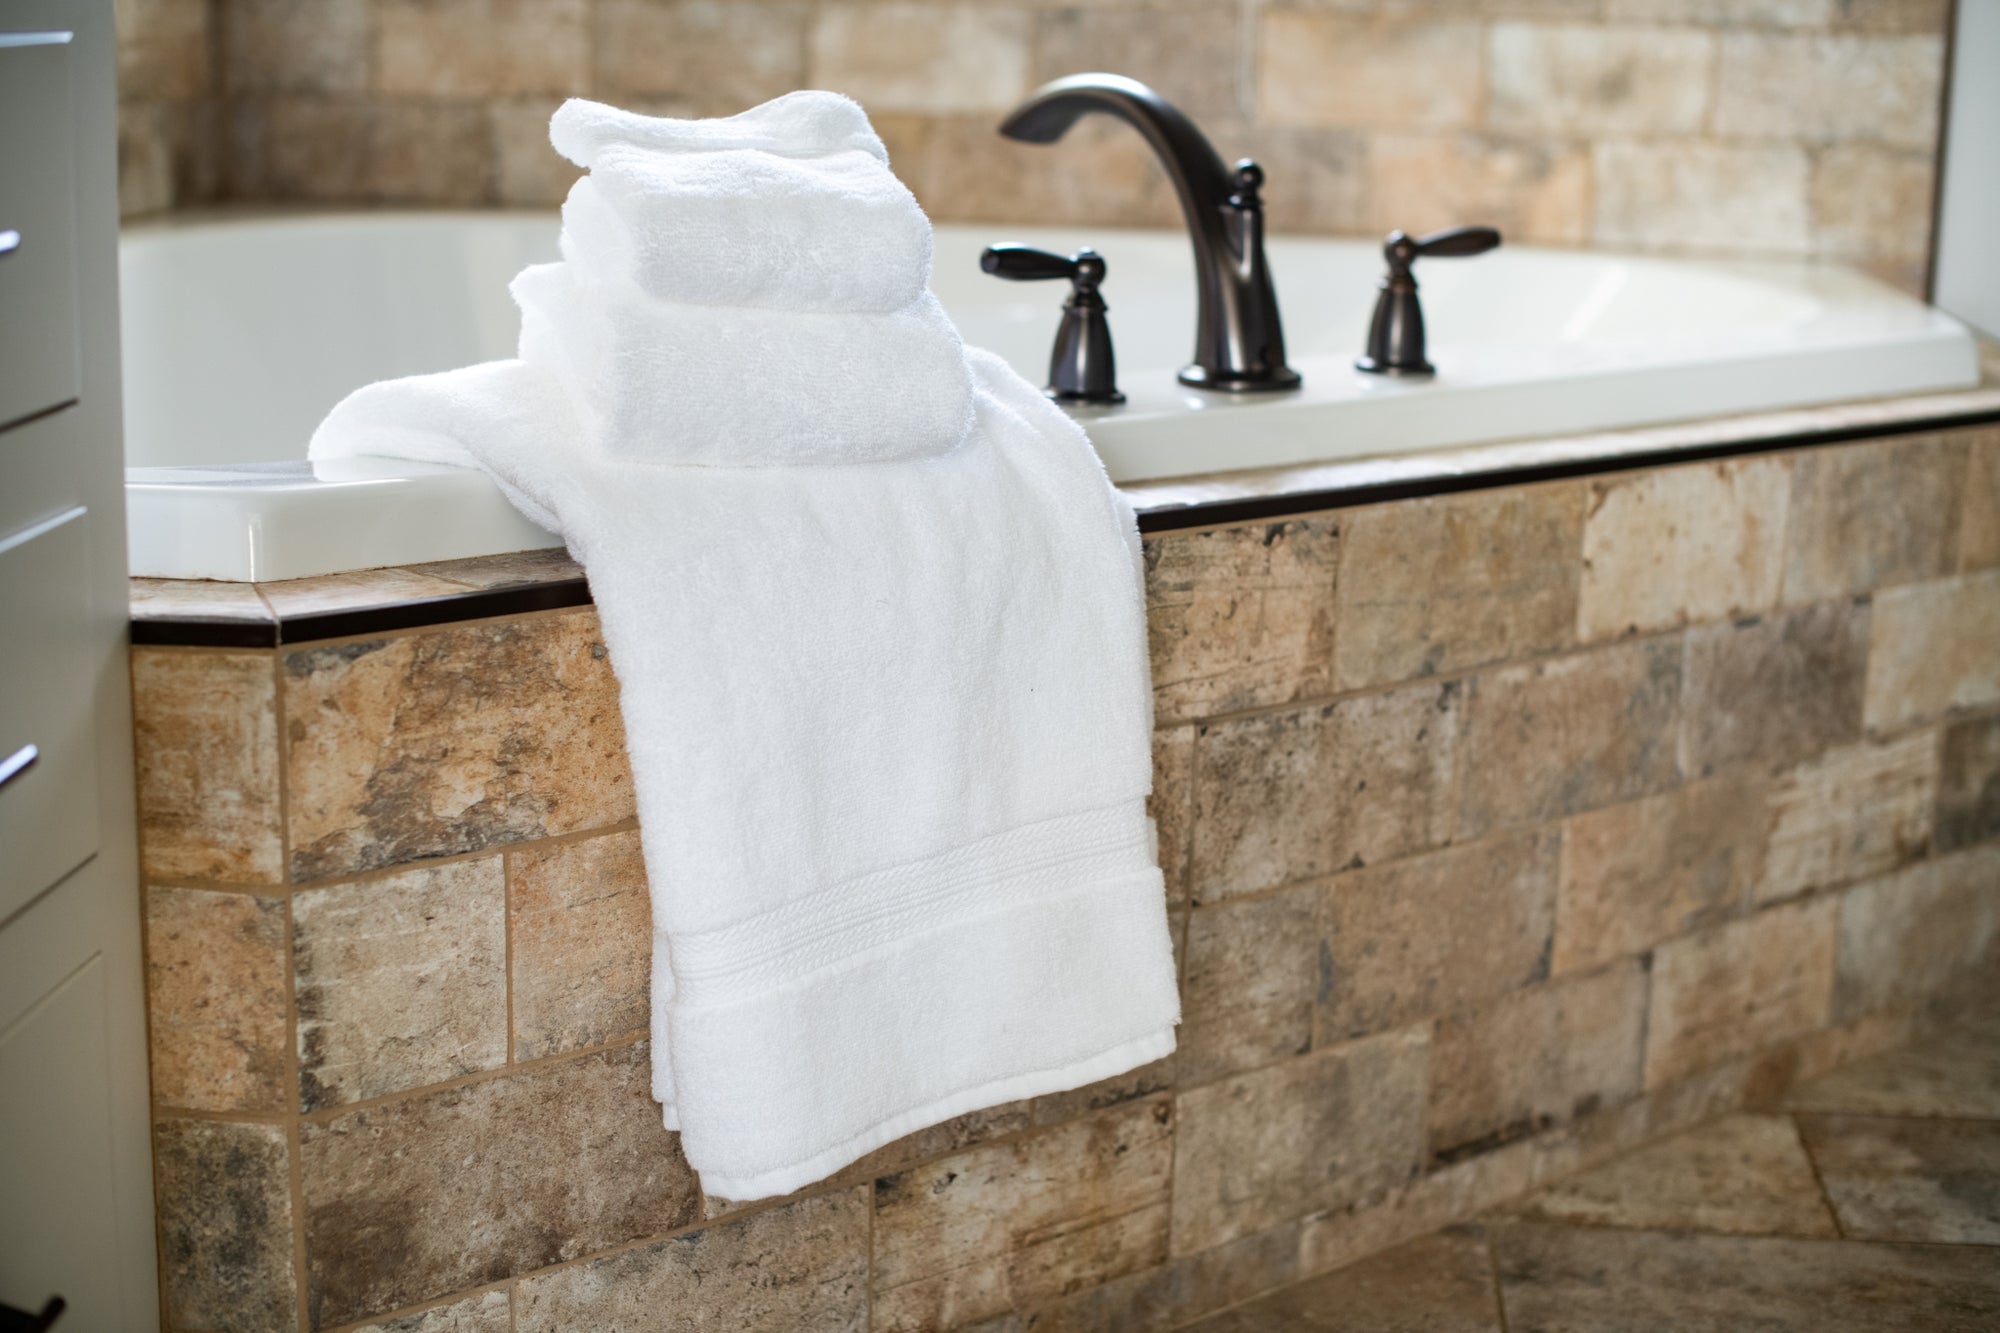 How to decorate your bathroom with towels